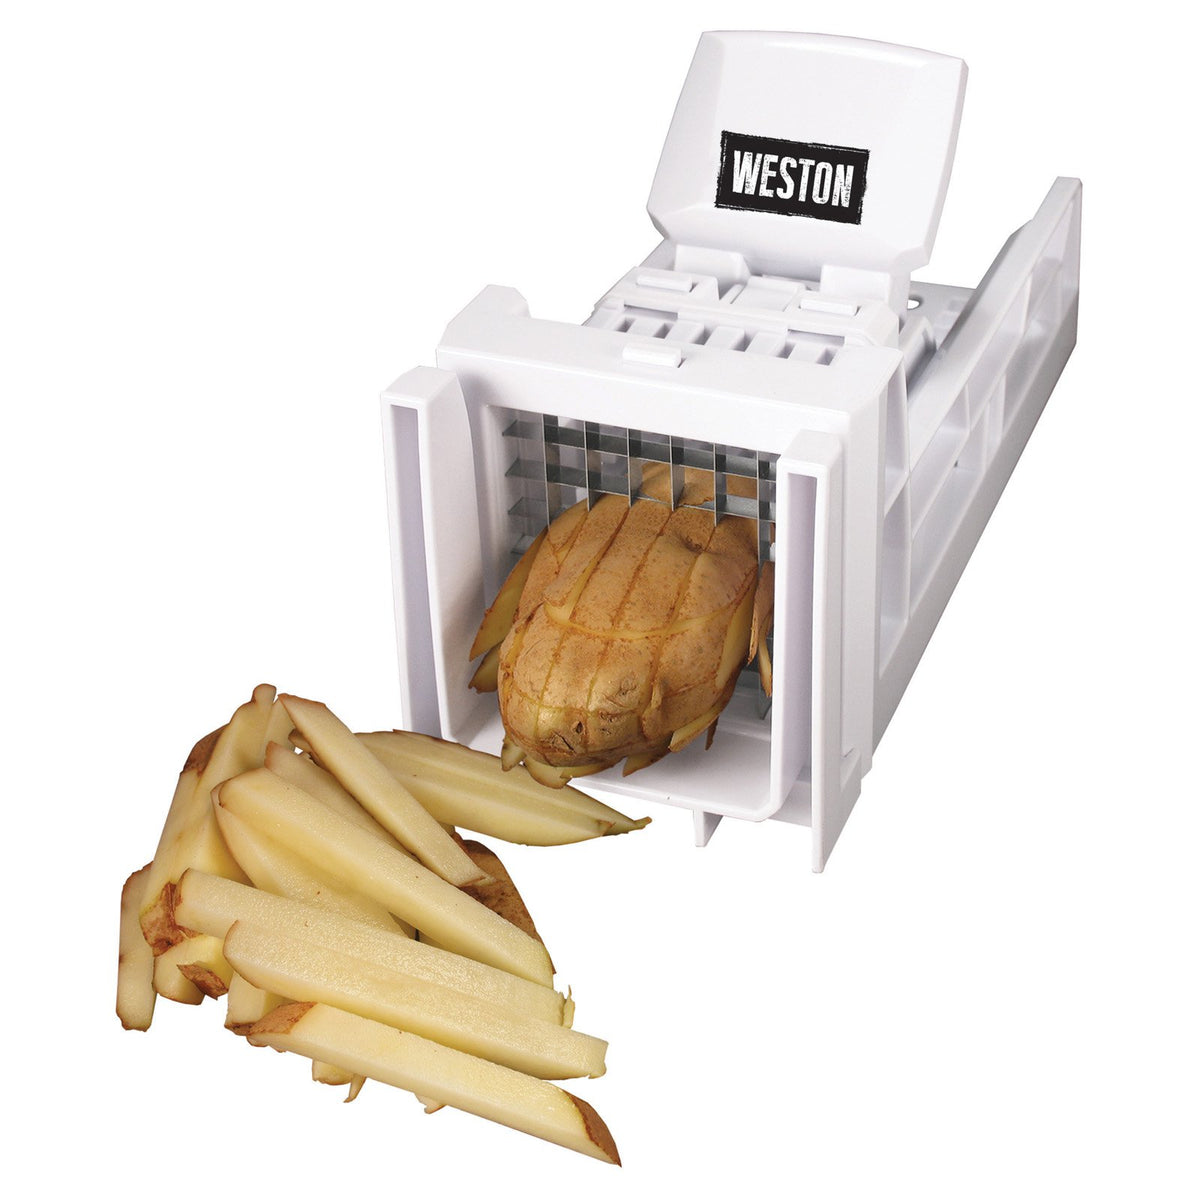 Weston Restaurant French Fry Cutter Meat Processing Products